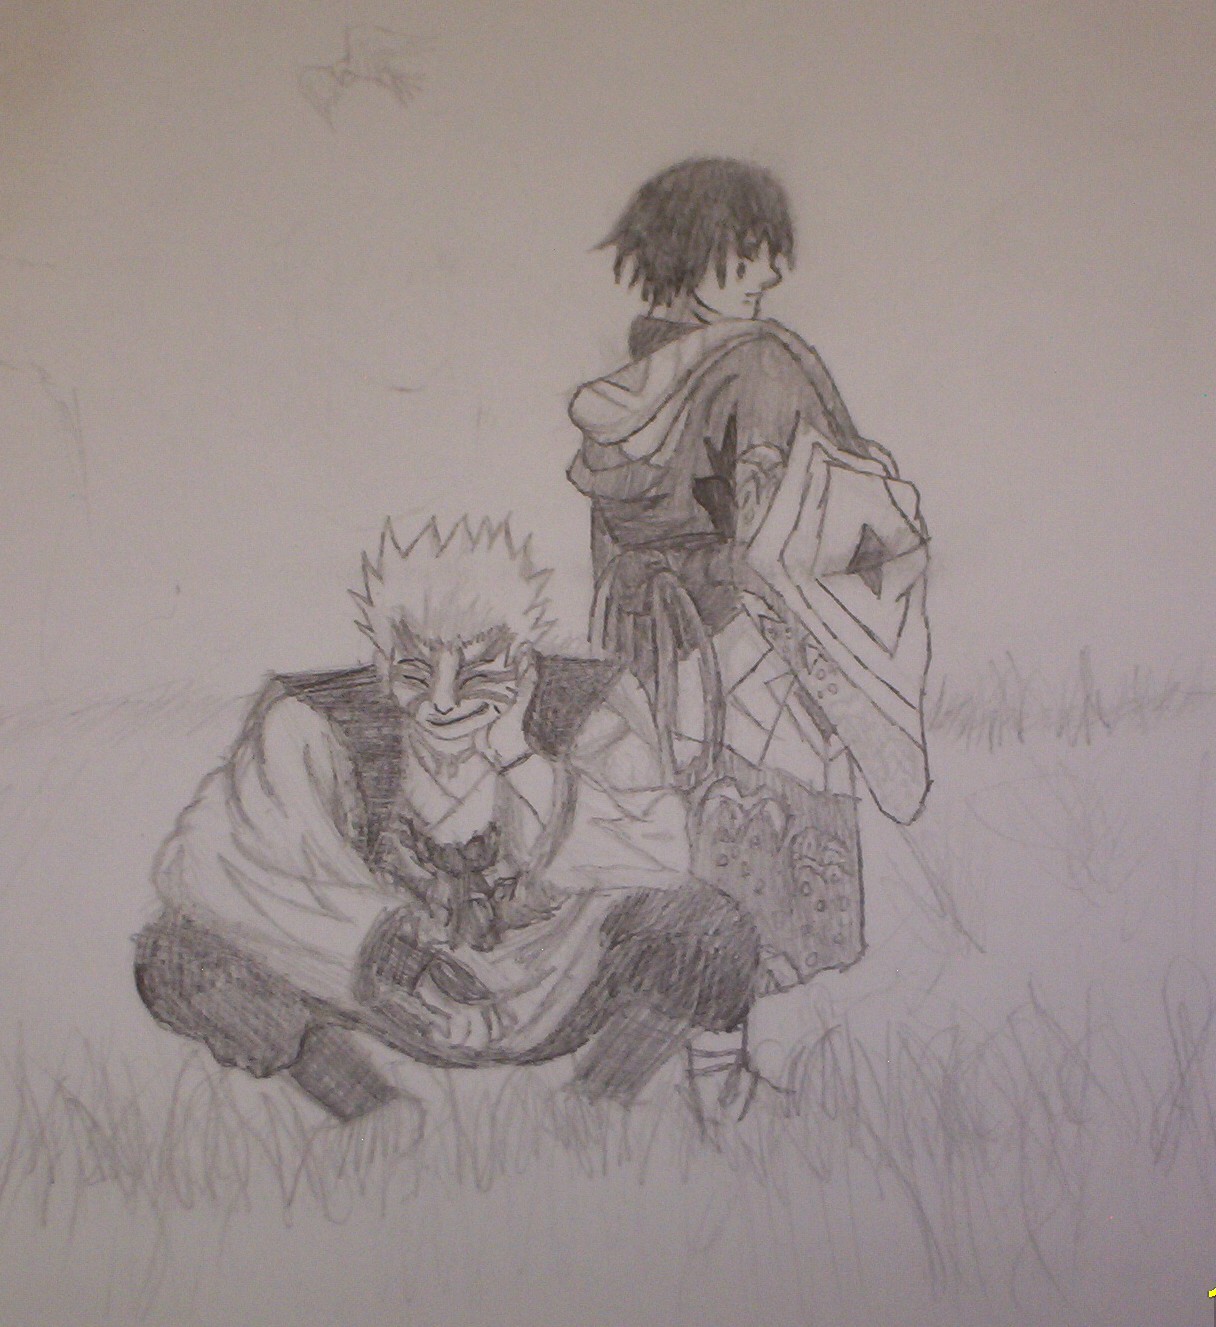 Naruto in Disguise with Sasuke by BGSGLGW1